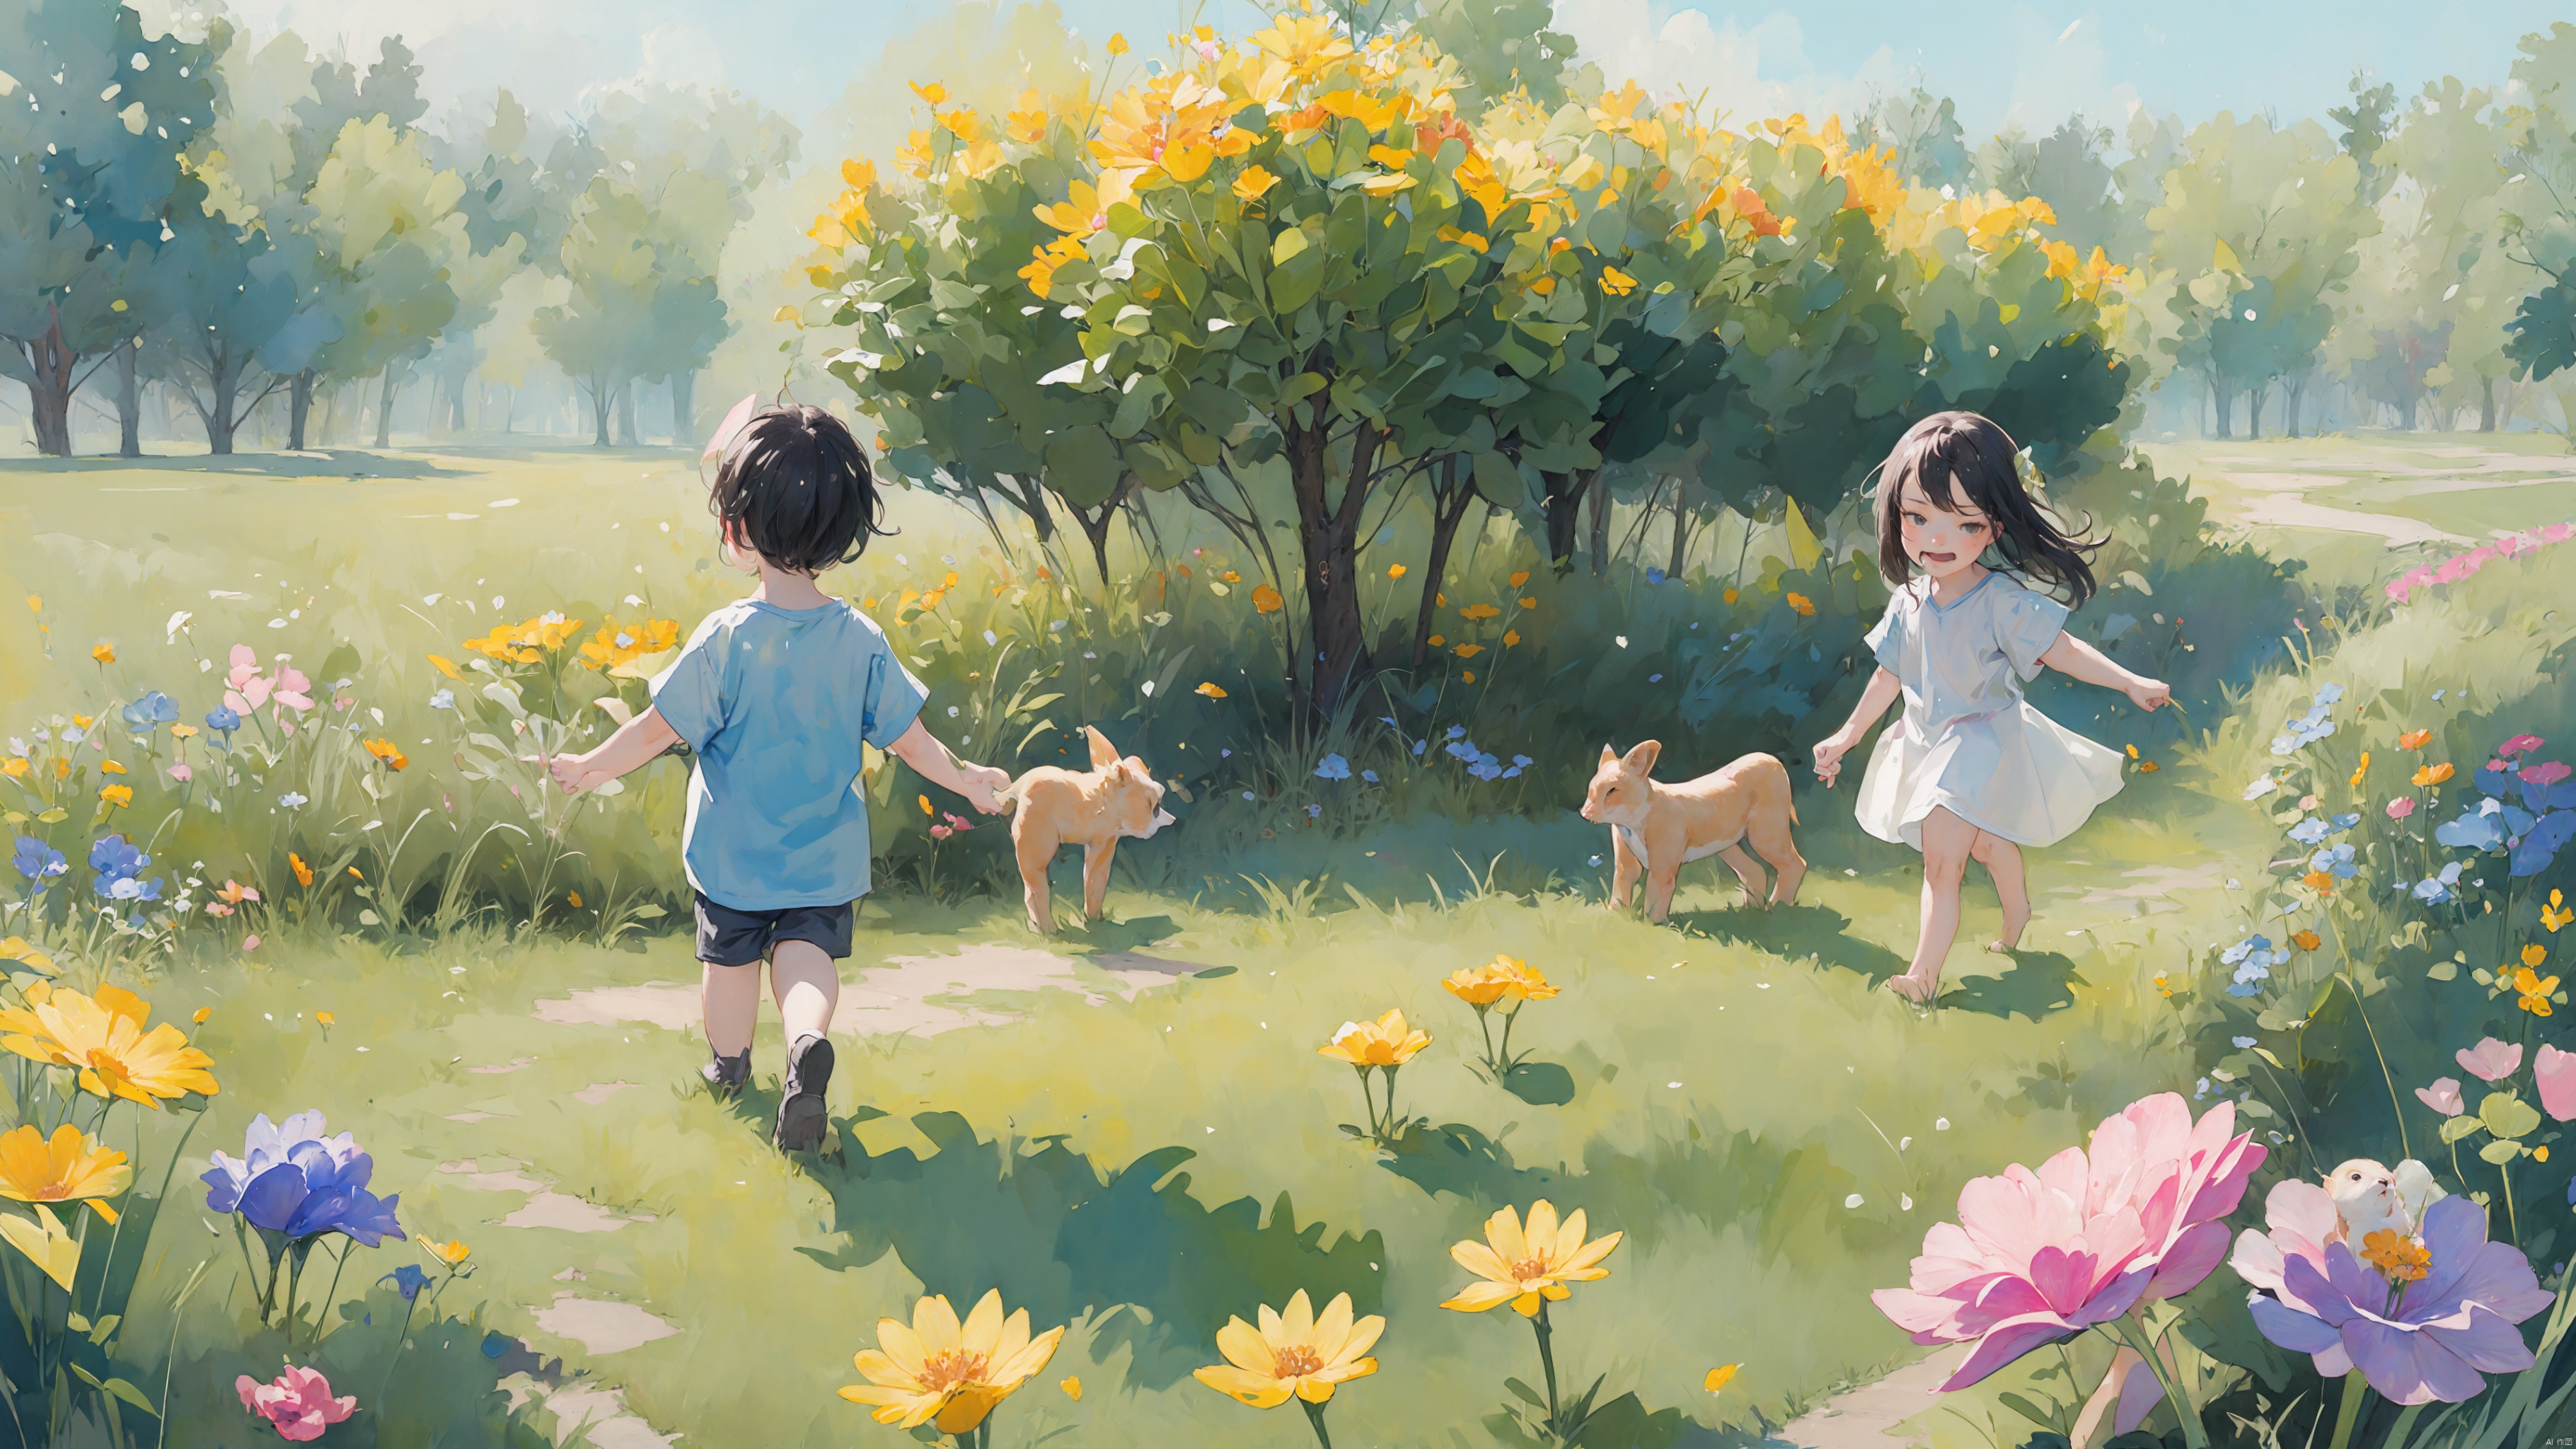  absurdres,incredibly absurdres,masterpiece,best quality,1girl,1boy,child,detail light,small animals,in spring,nature,action,kawaii,in a meadow,full-blown flowers,whole family,love,friend,play,lively,watercolor
